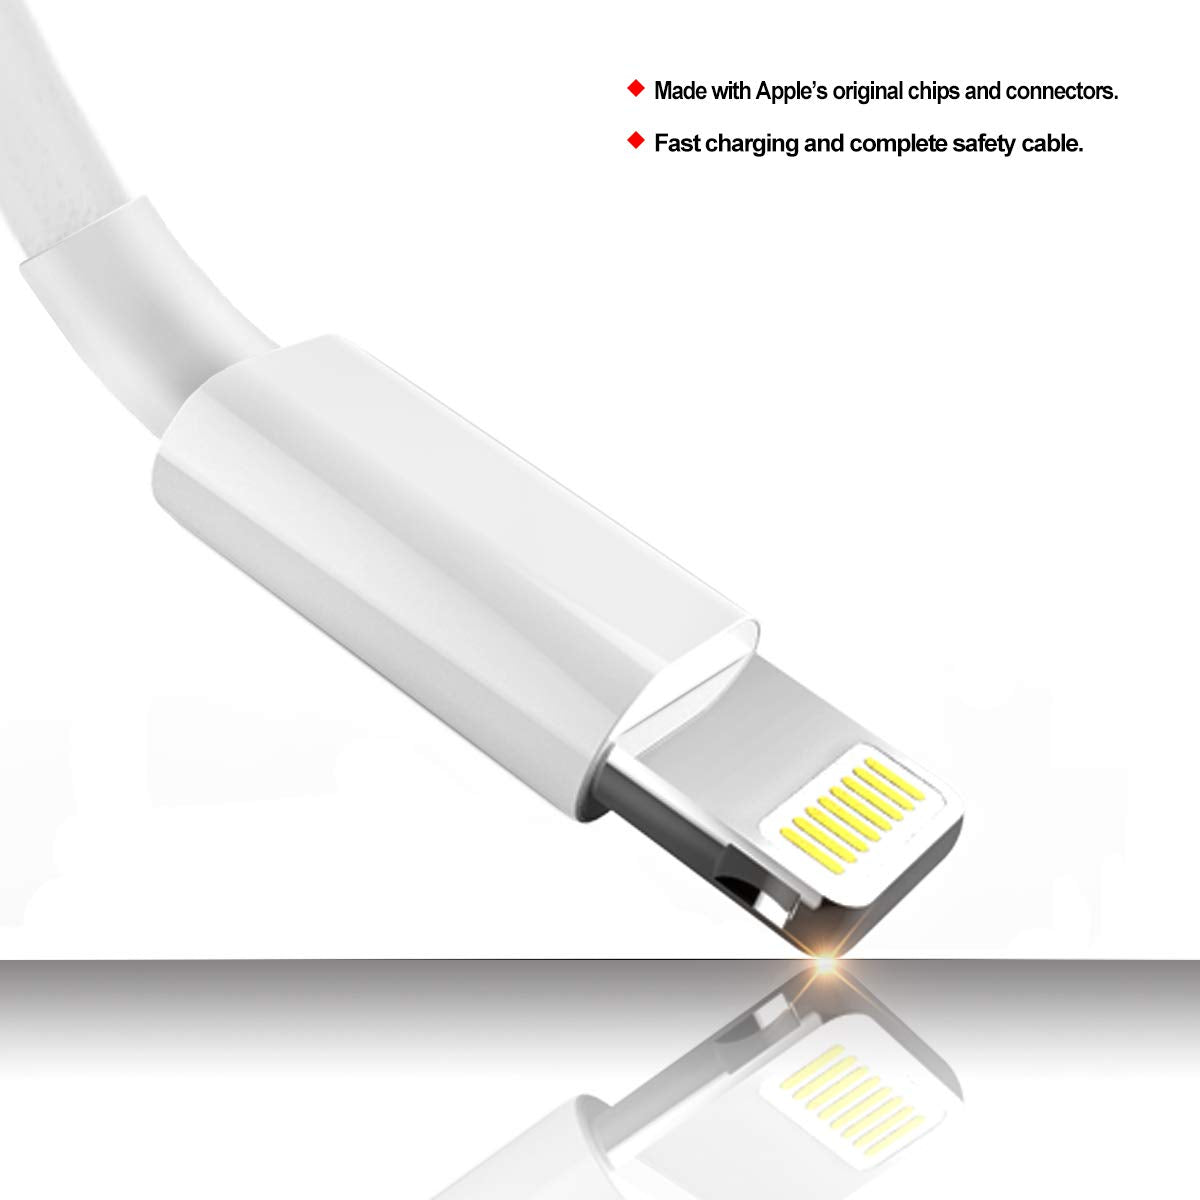 USB A to Lighting Charging Cable MFI Certified